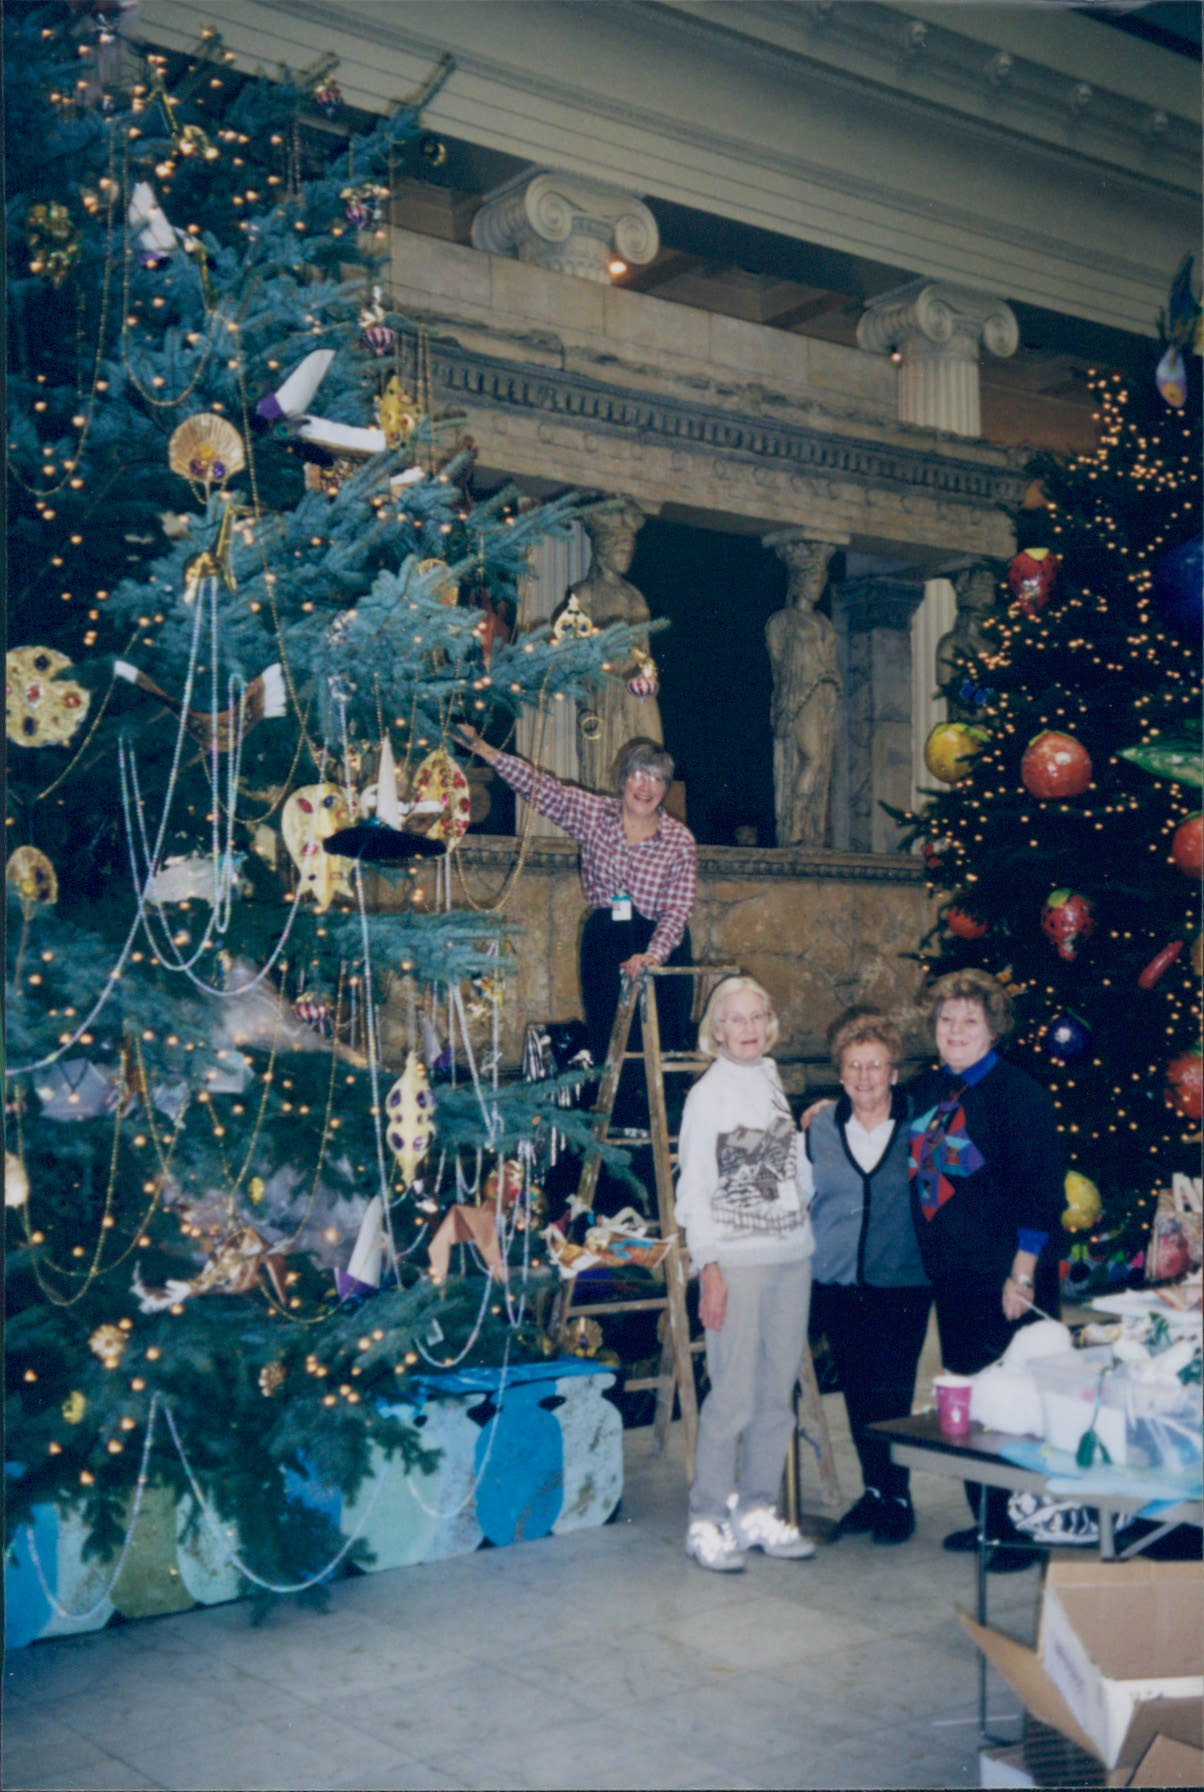 A group of women decorate trees c. 1980